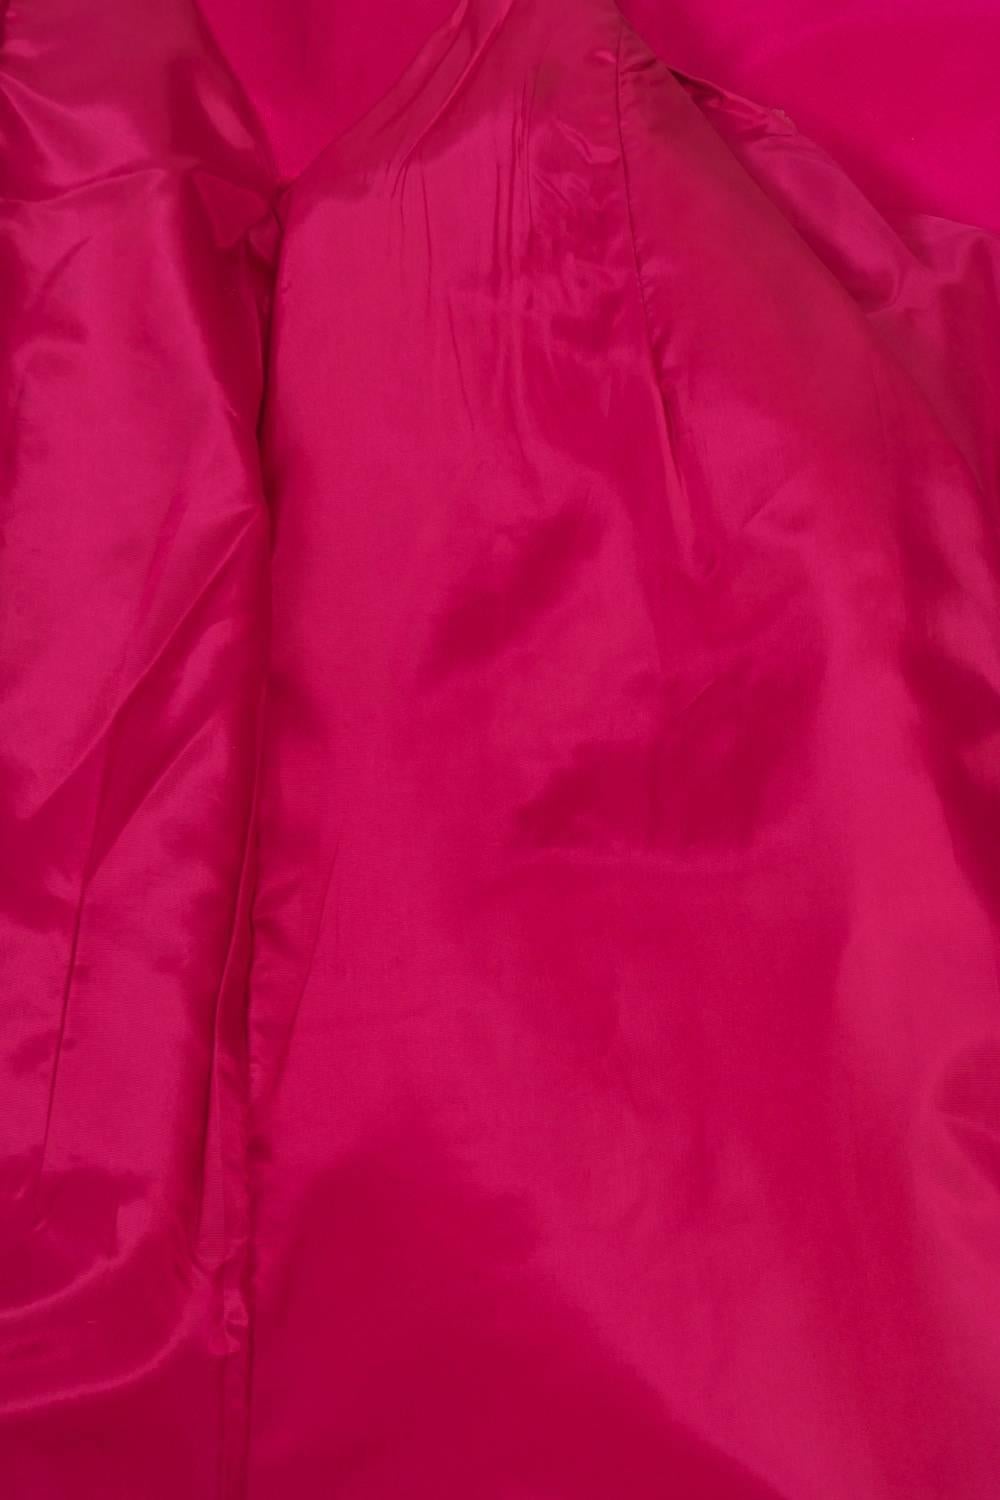 Cerise Silk Evening Coat In Good Condition For Sale In Alford, MA